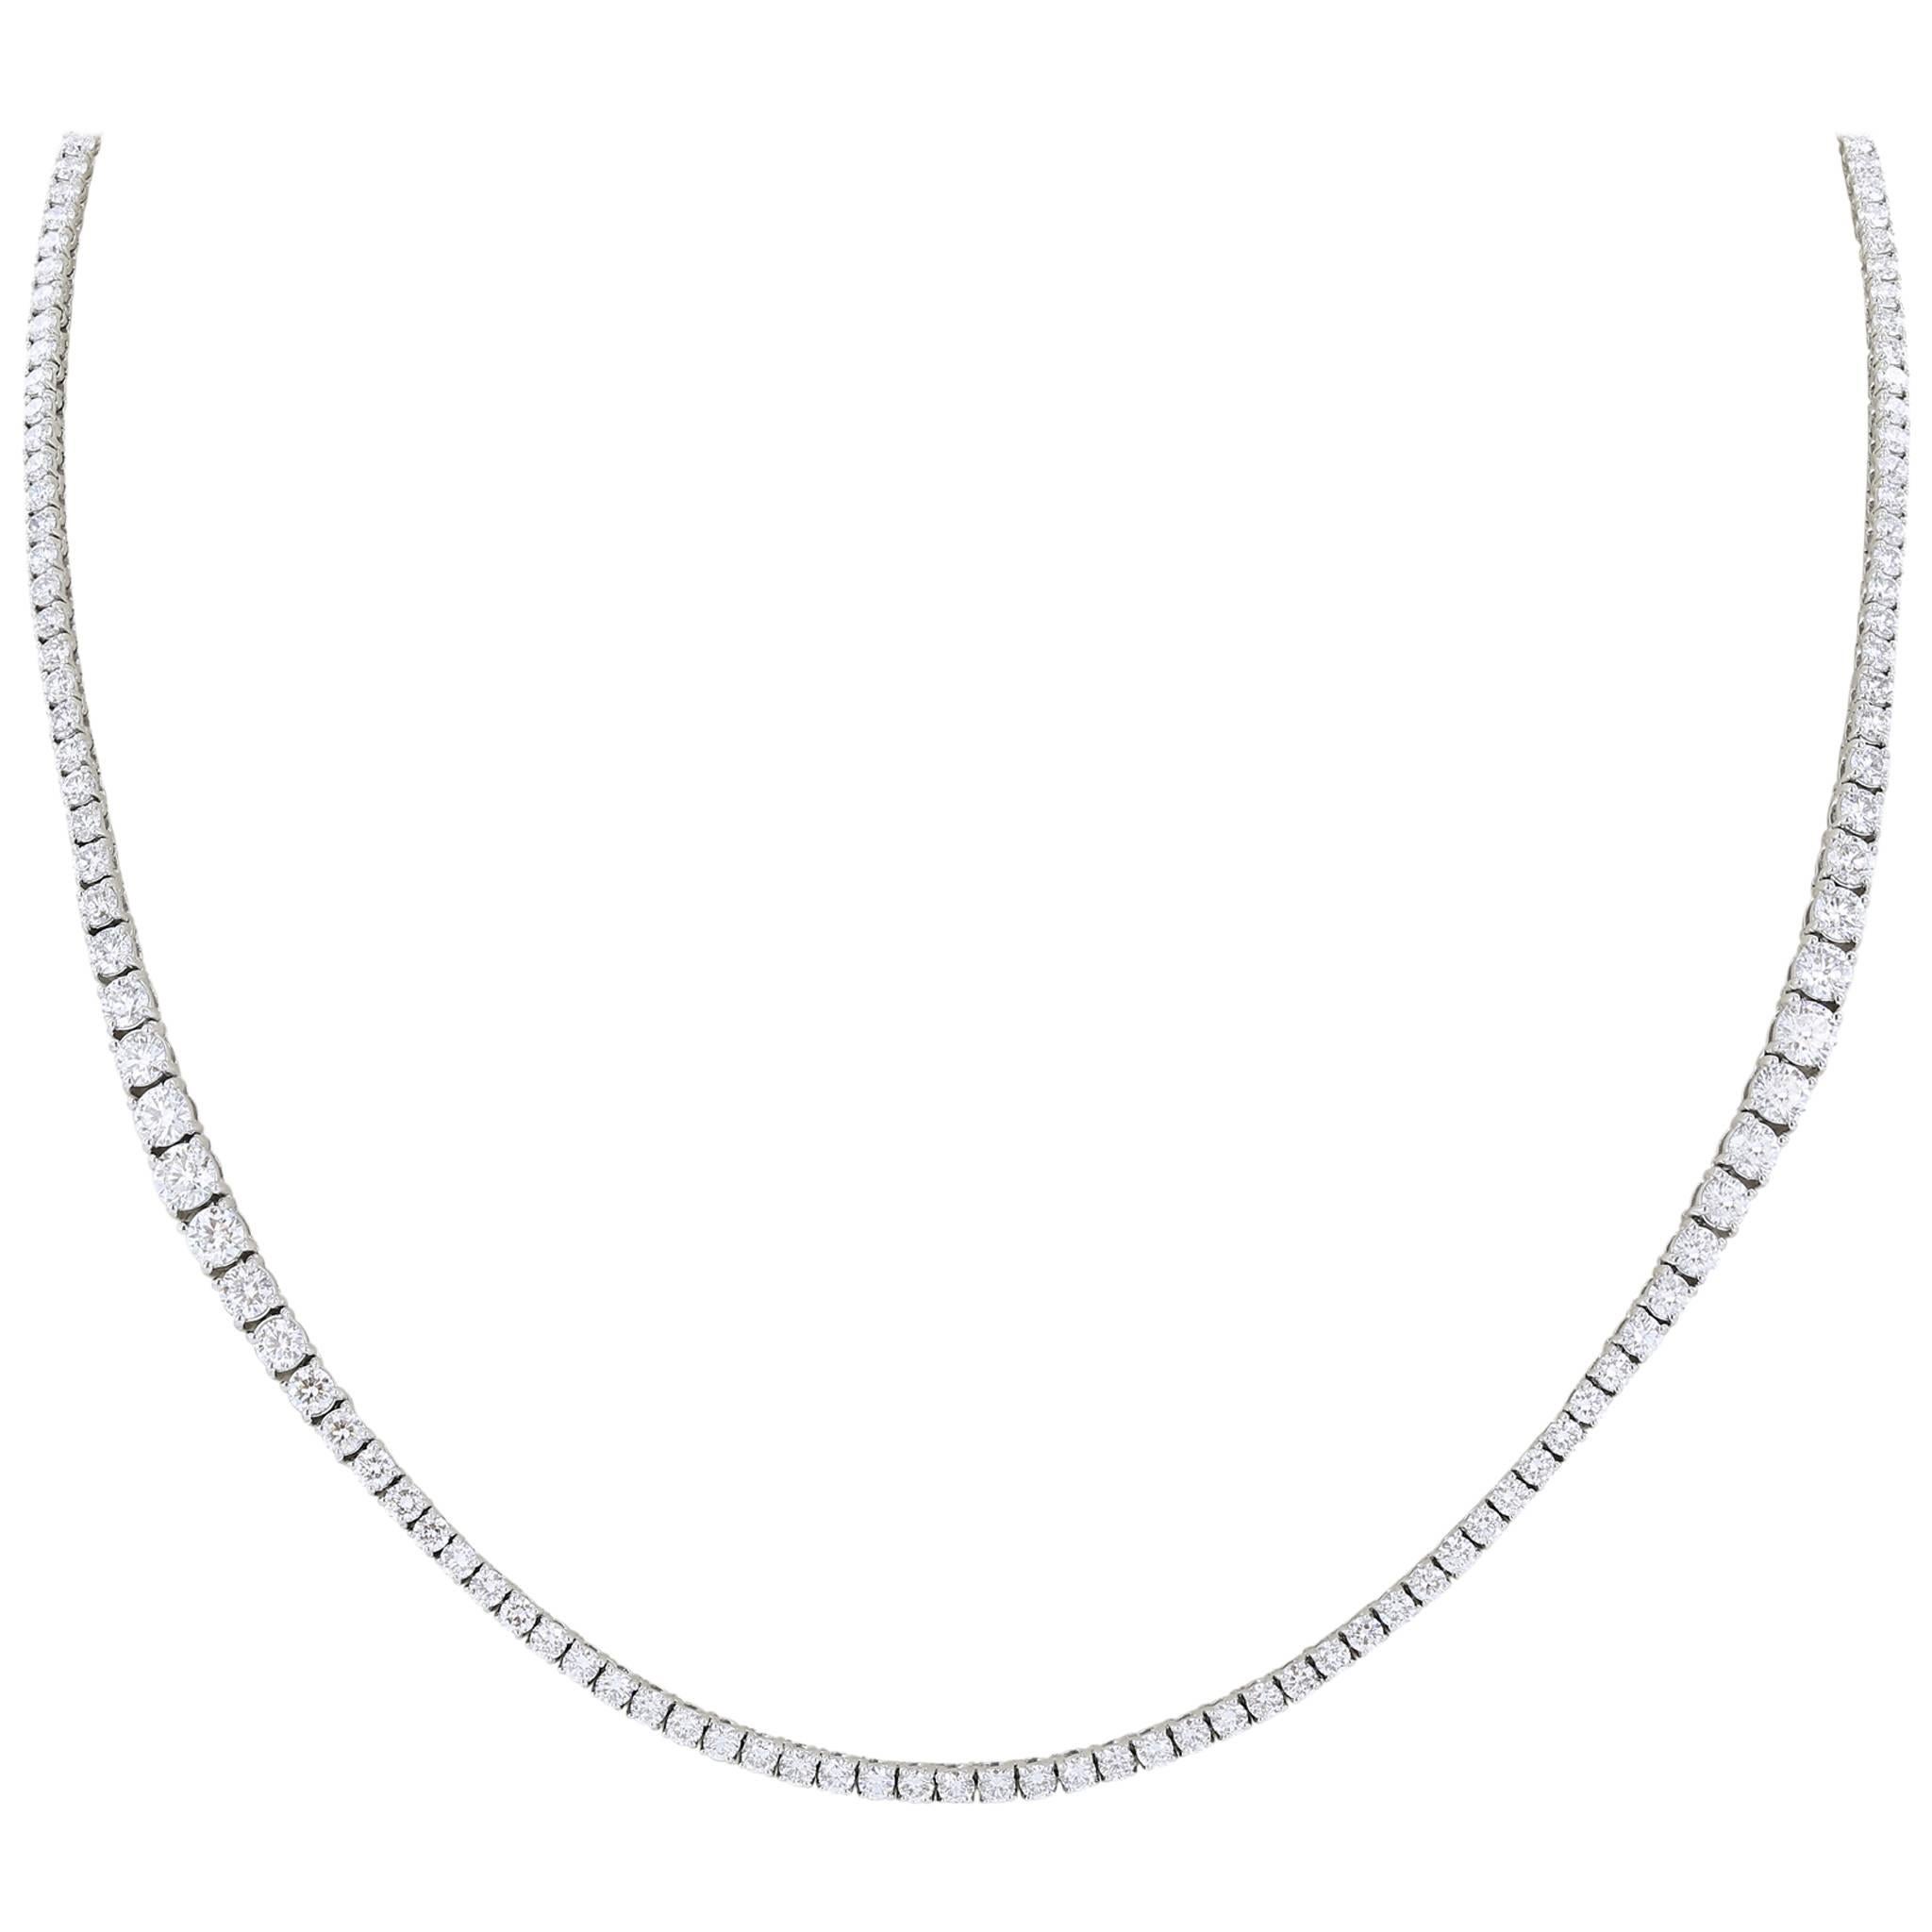 20.87 Carat Diamond Gold Riviere Necklace For Sale